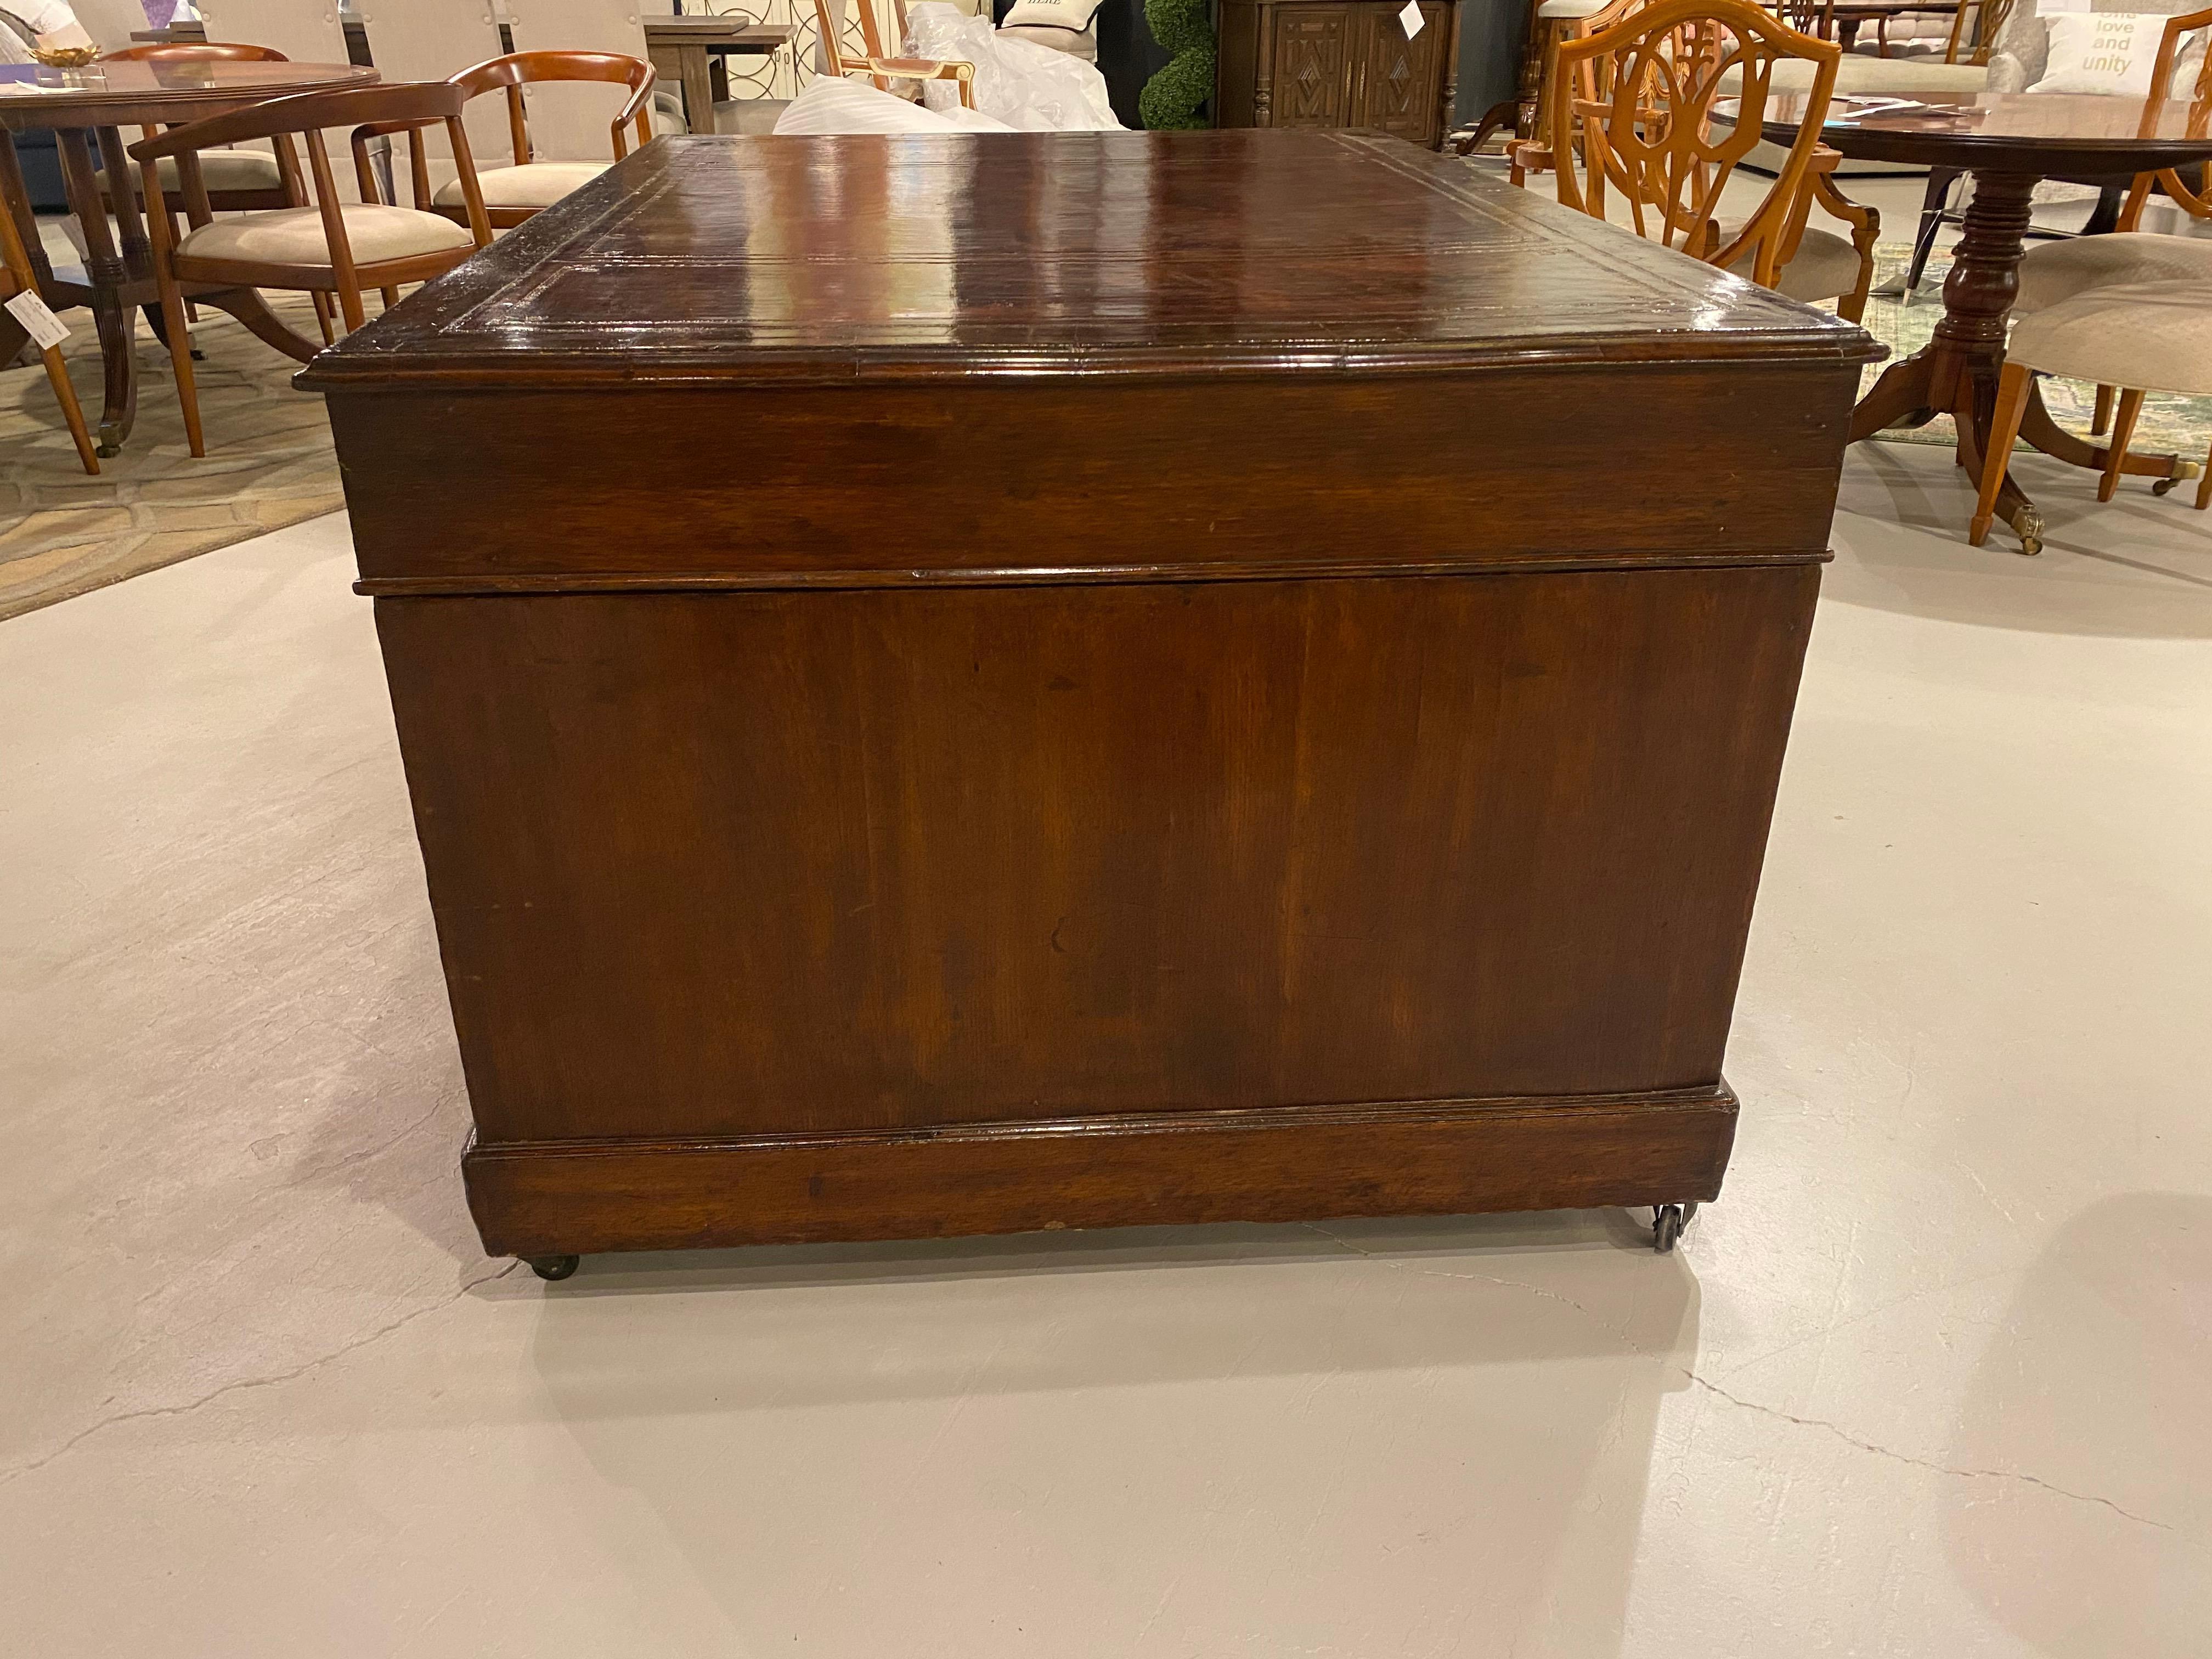 19th Century Oak Partners Desk, Leather Writing Surface, Brass Hardware In Fair Condition For Sale In Toronto, CA